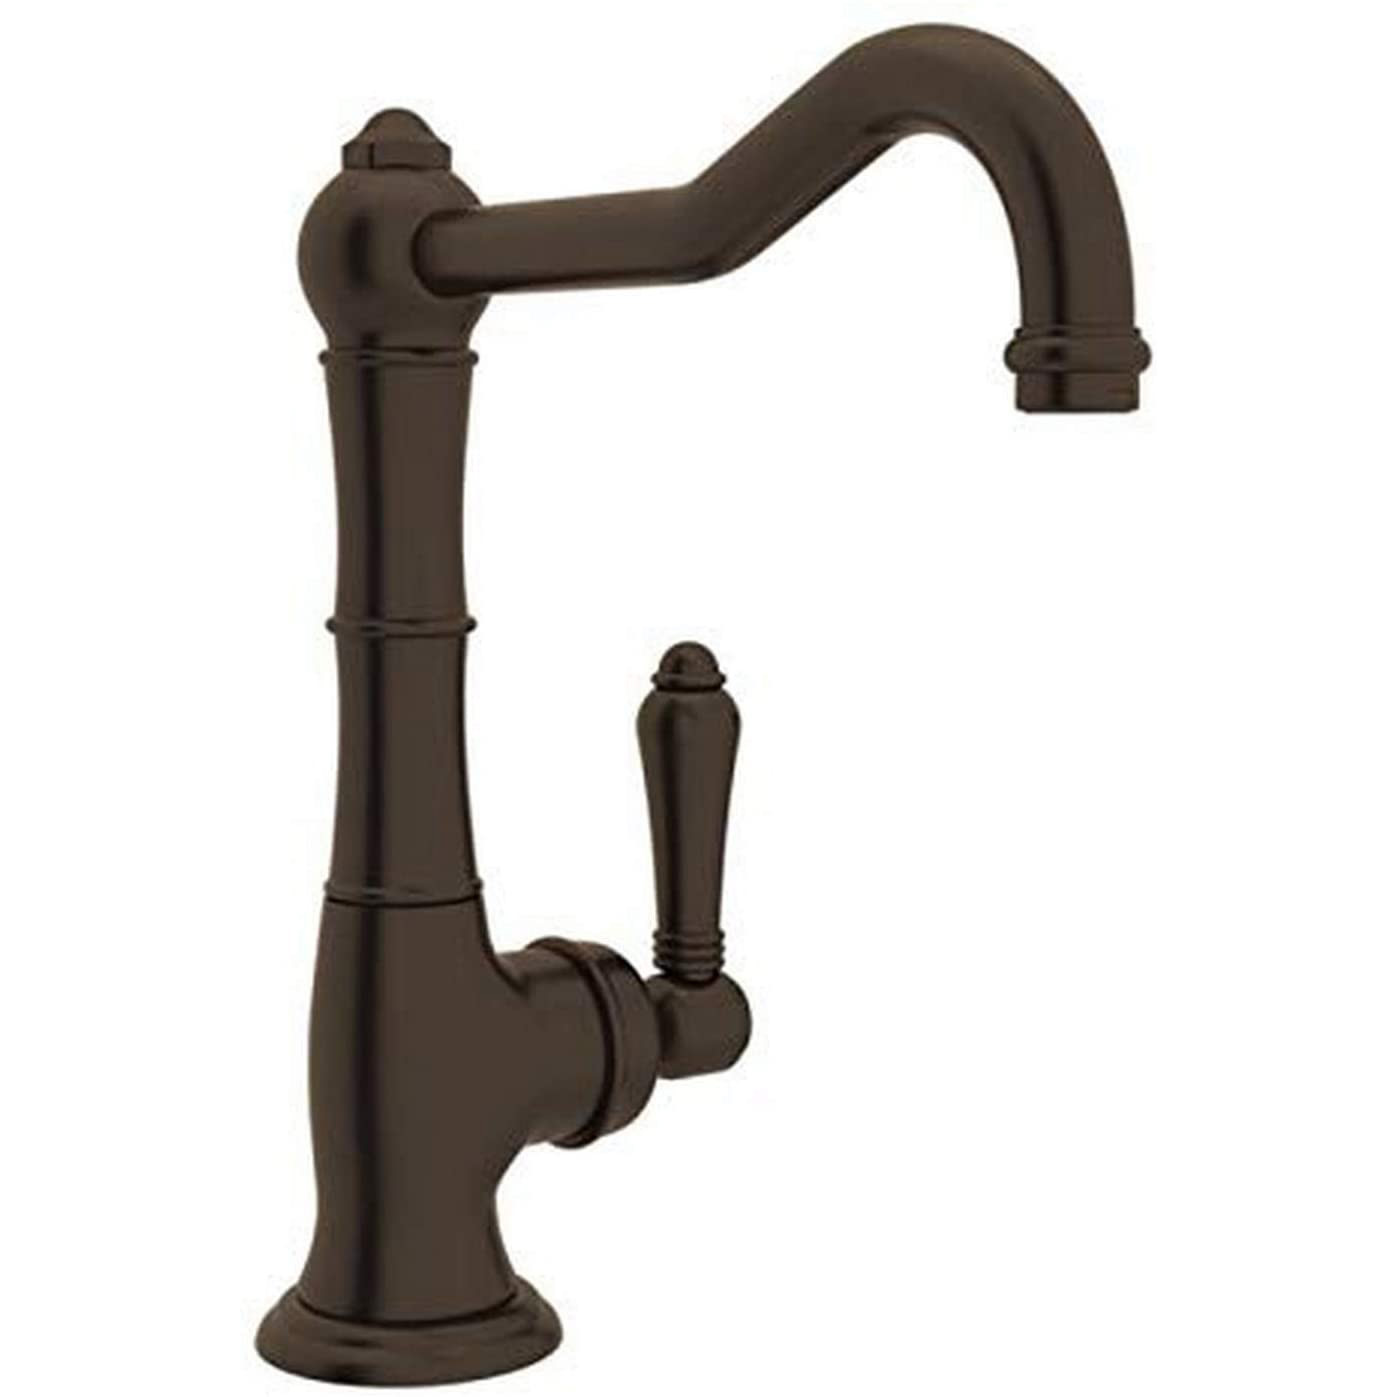 Cinquanta Single Home Bar Faucet in Tuscan Brass w/Metal Lever